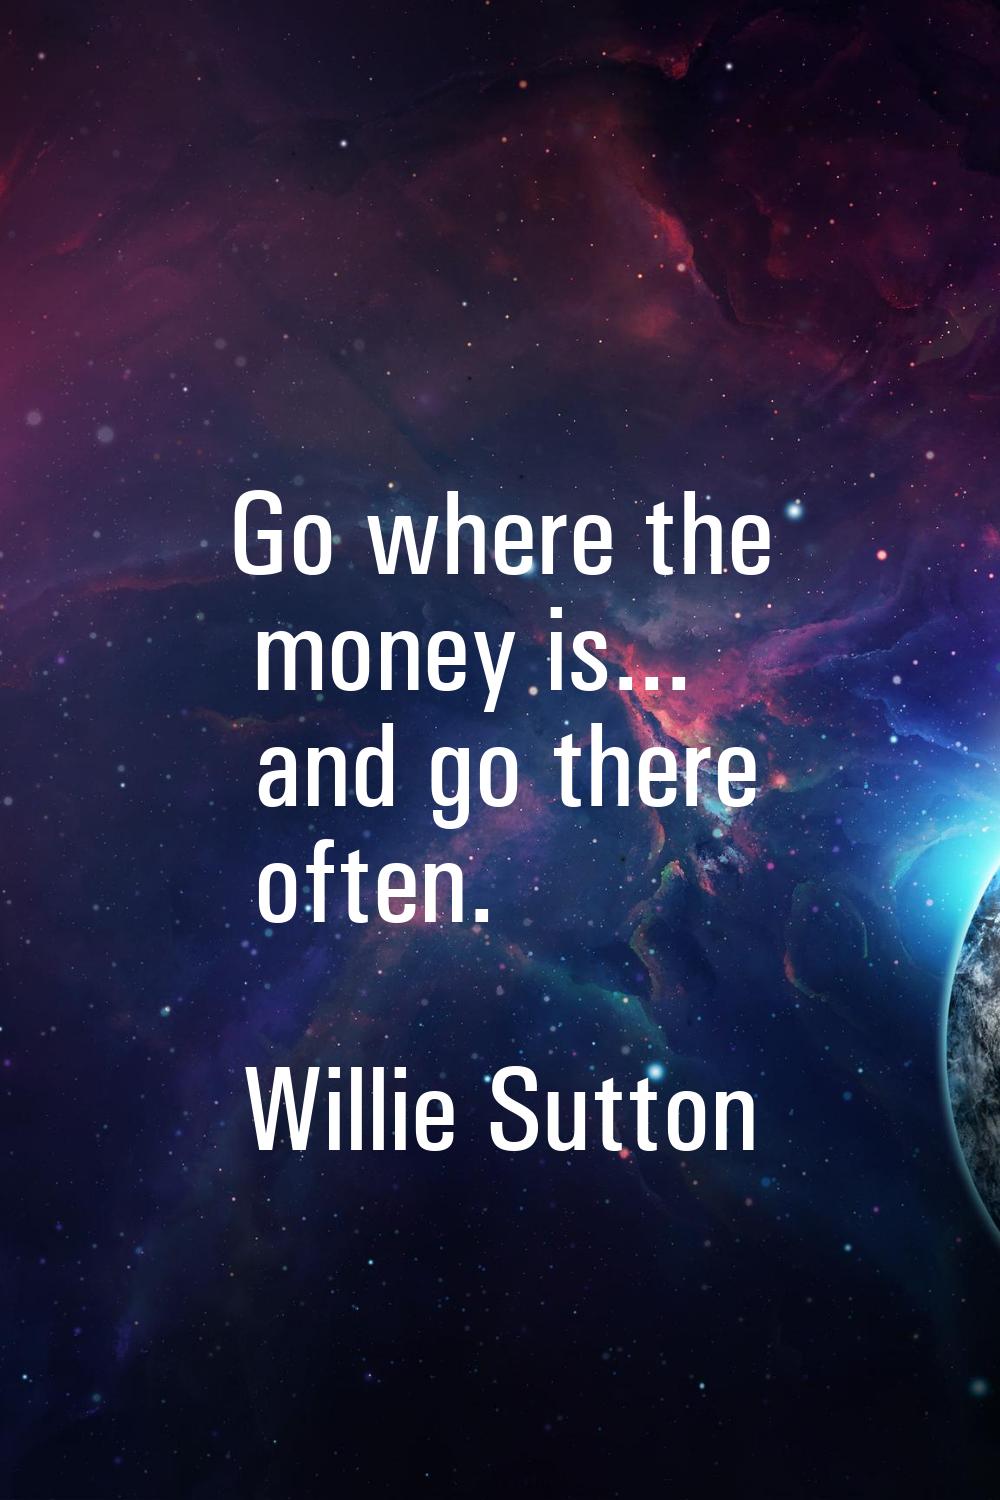 Go where the money is... and go there often.